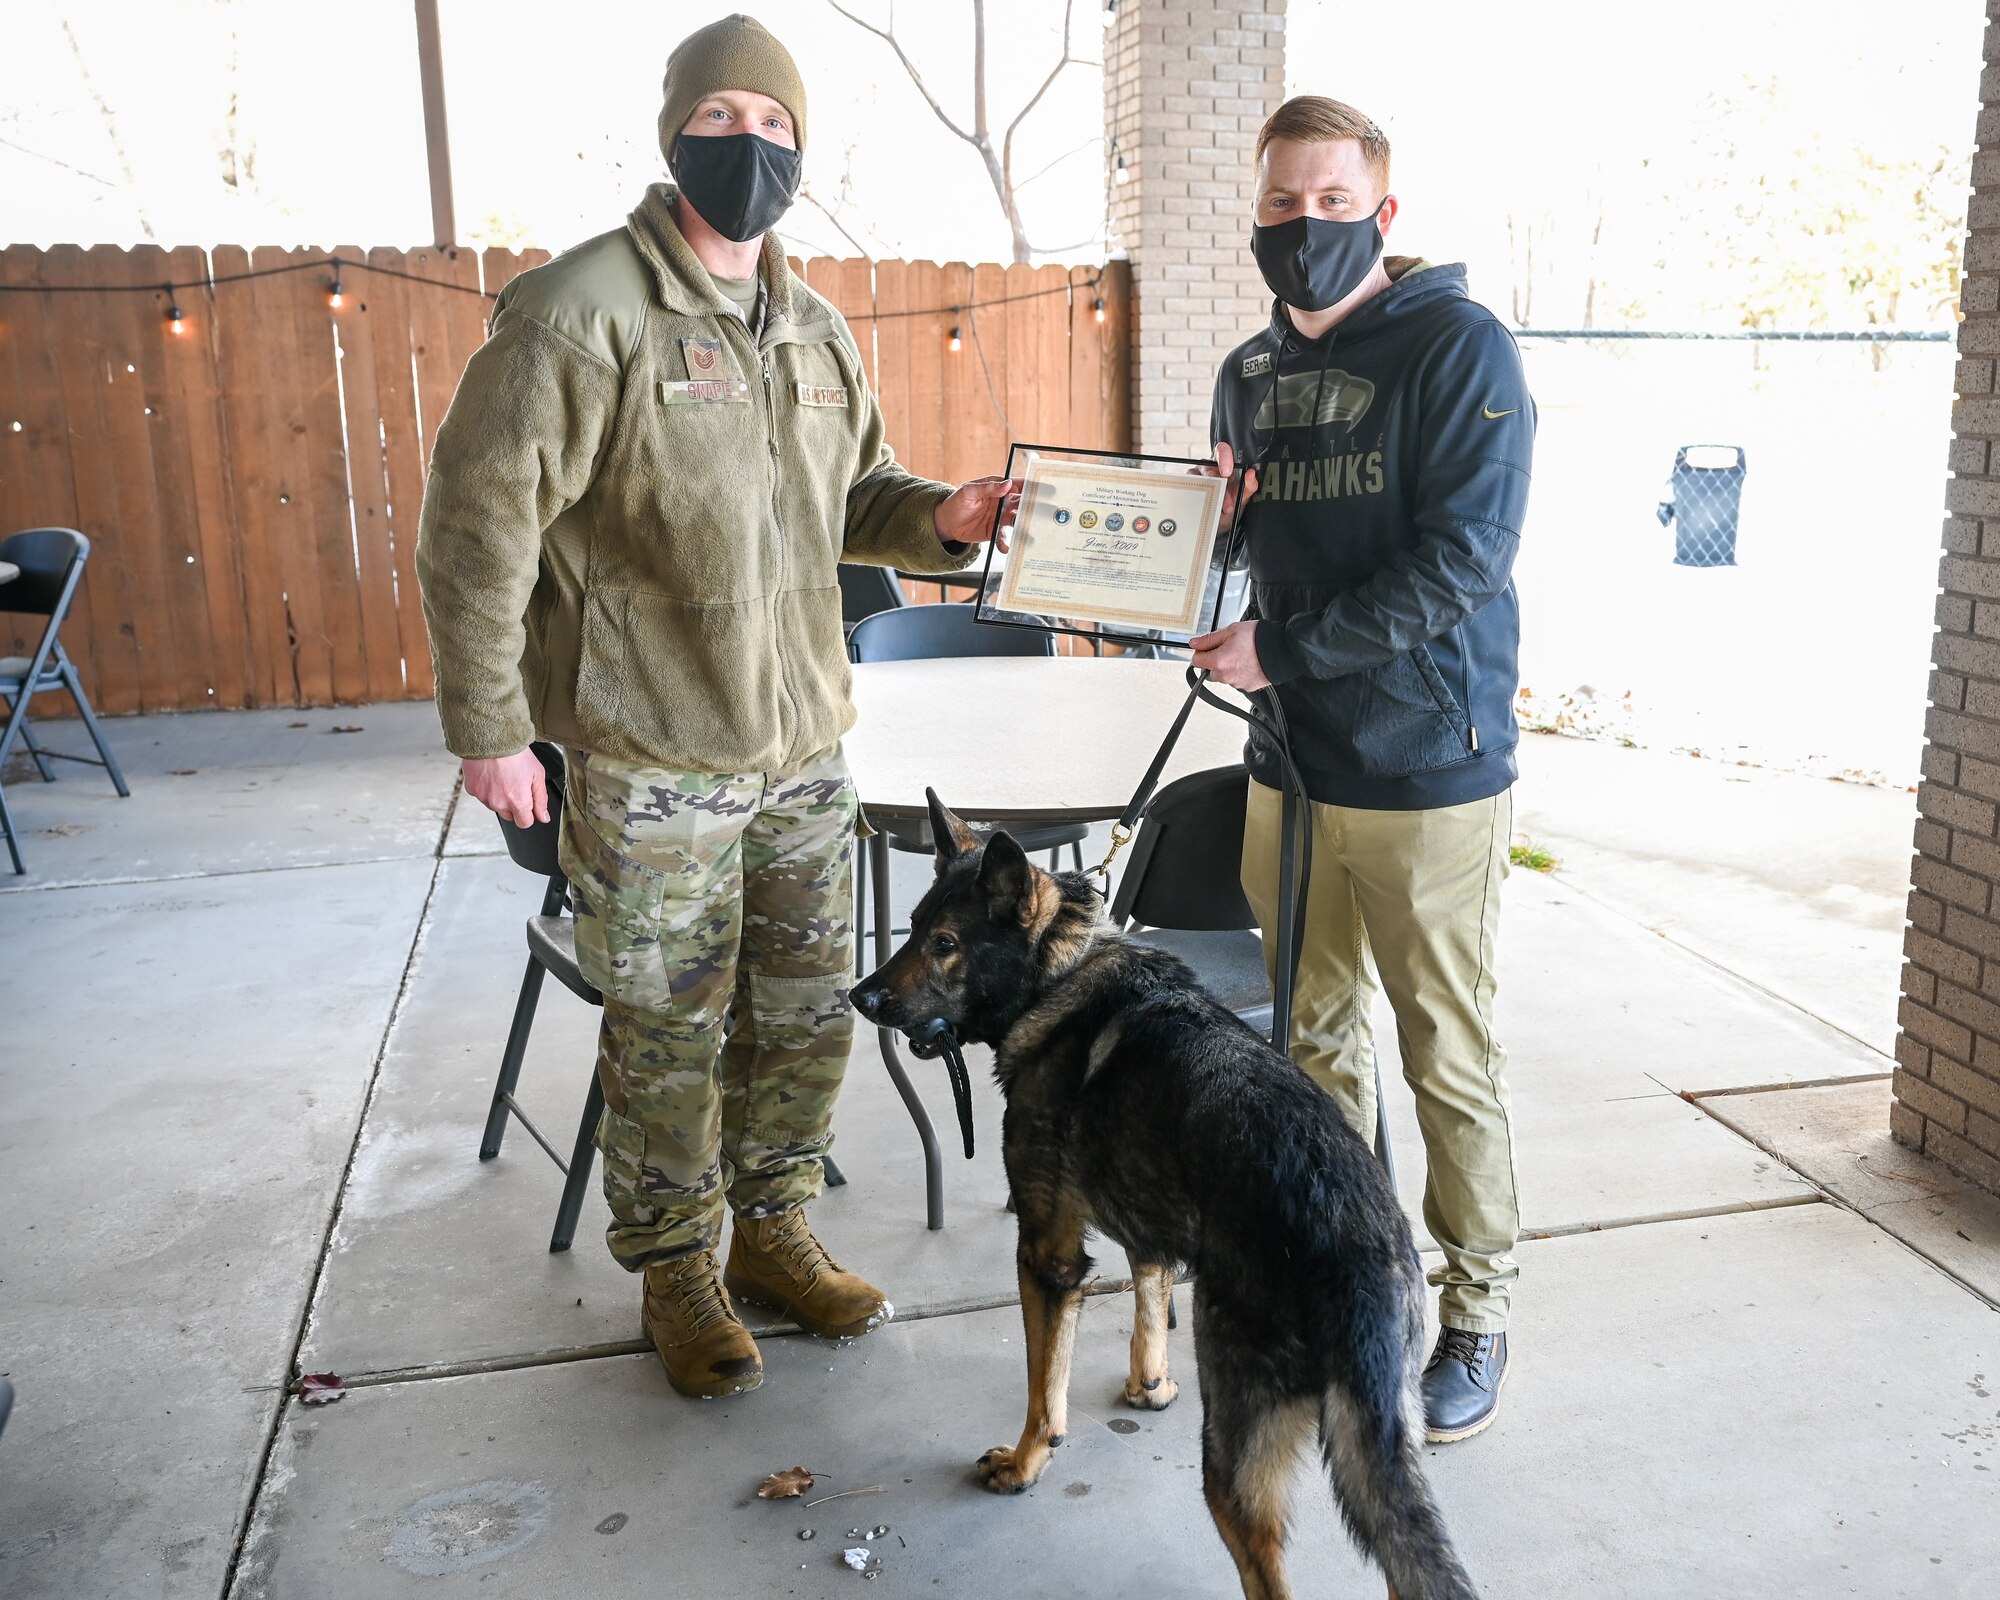 Military working dog Jimo with former handler Staff Sgt. Patrick Cushing (right), 75th Security Forces Squadron, is recognized during his retirement celebration by Tech. Sgt. Kyle Snape, 75th SFS MWD NCOIC, Dec. 10, 2021, at Hill Air Force Base, Utah. MWD Jimo retired honorably after serving six years with the 75th SFS at Hill. (U.S. Air Force photo by Cynthia Griggs)